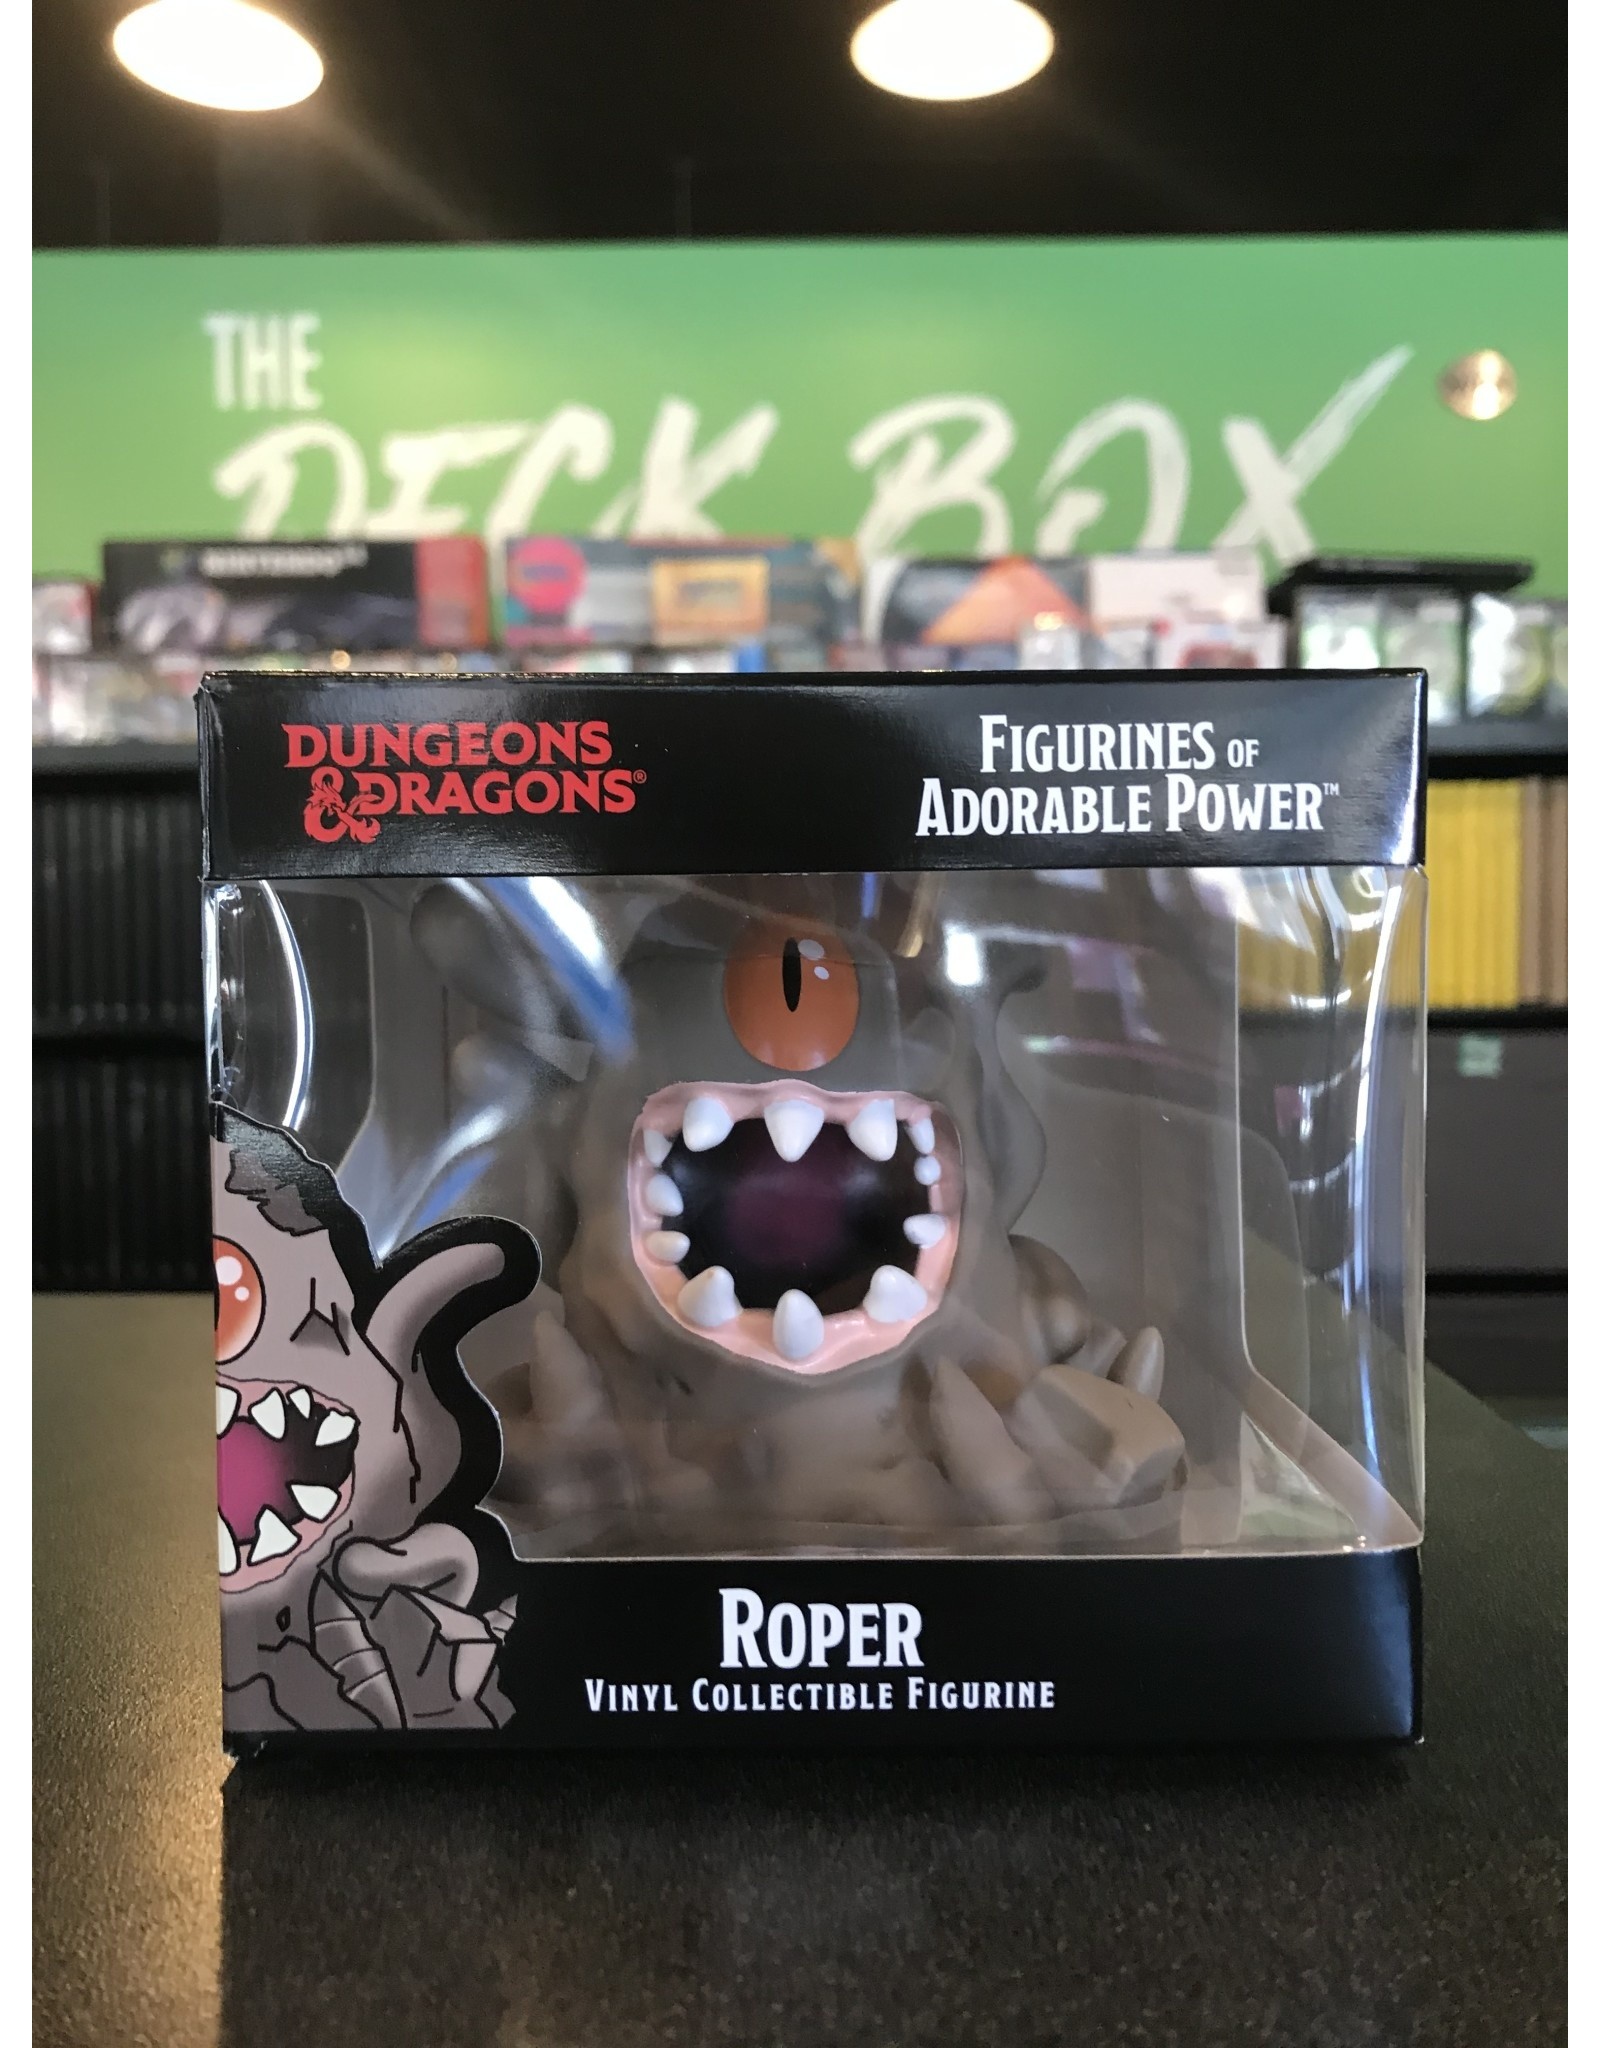 Dungeons and Dragons UP FIGURINES OF ADORABLE POWER: DND ROPER